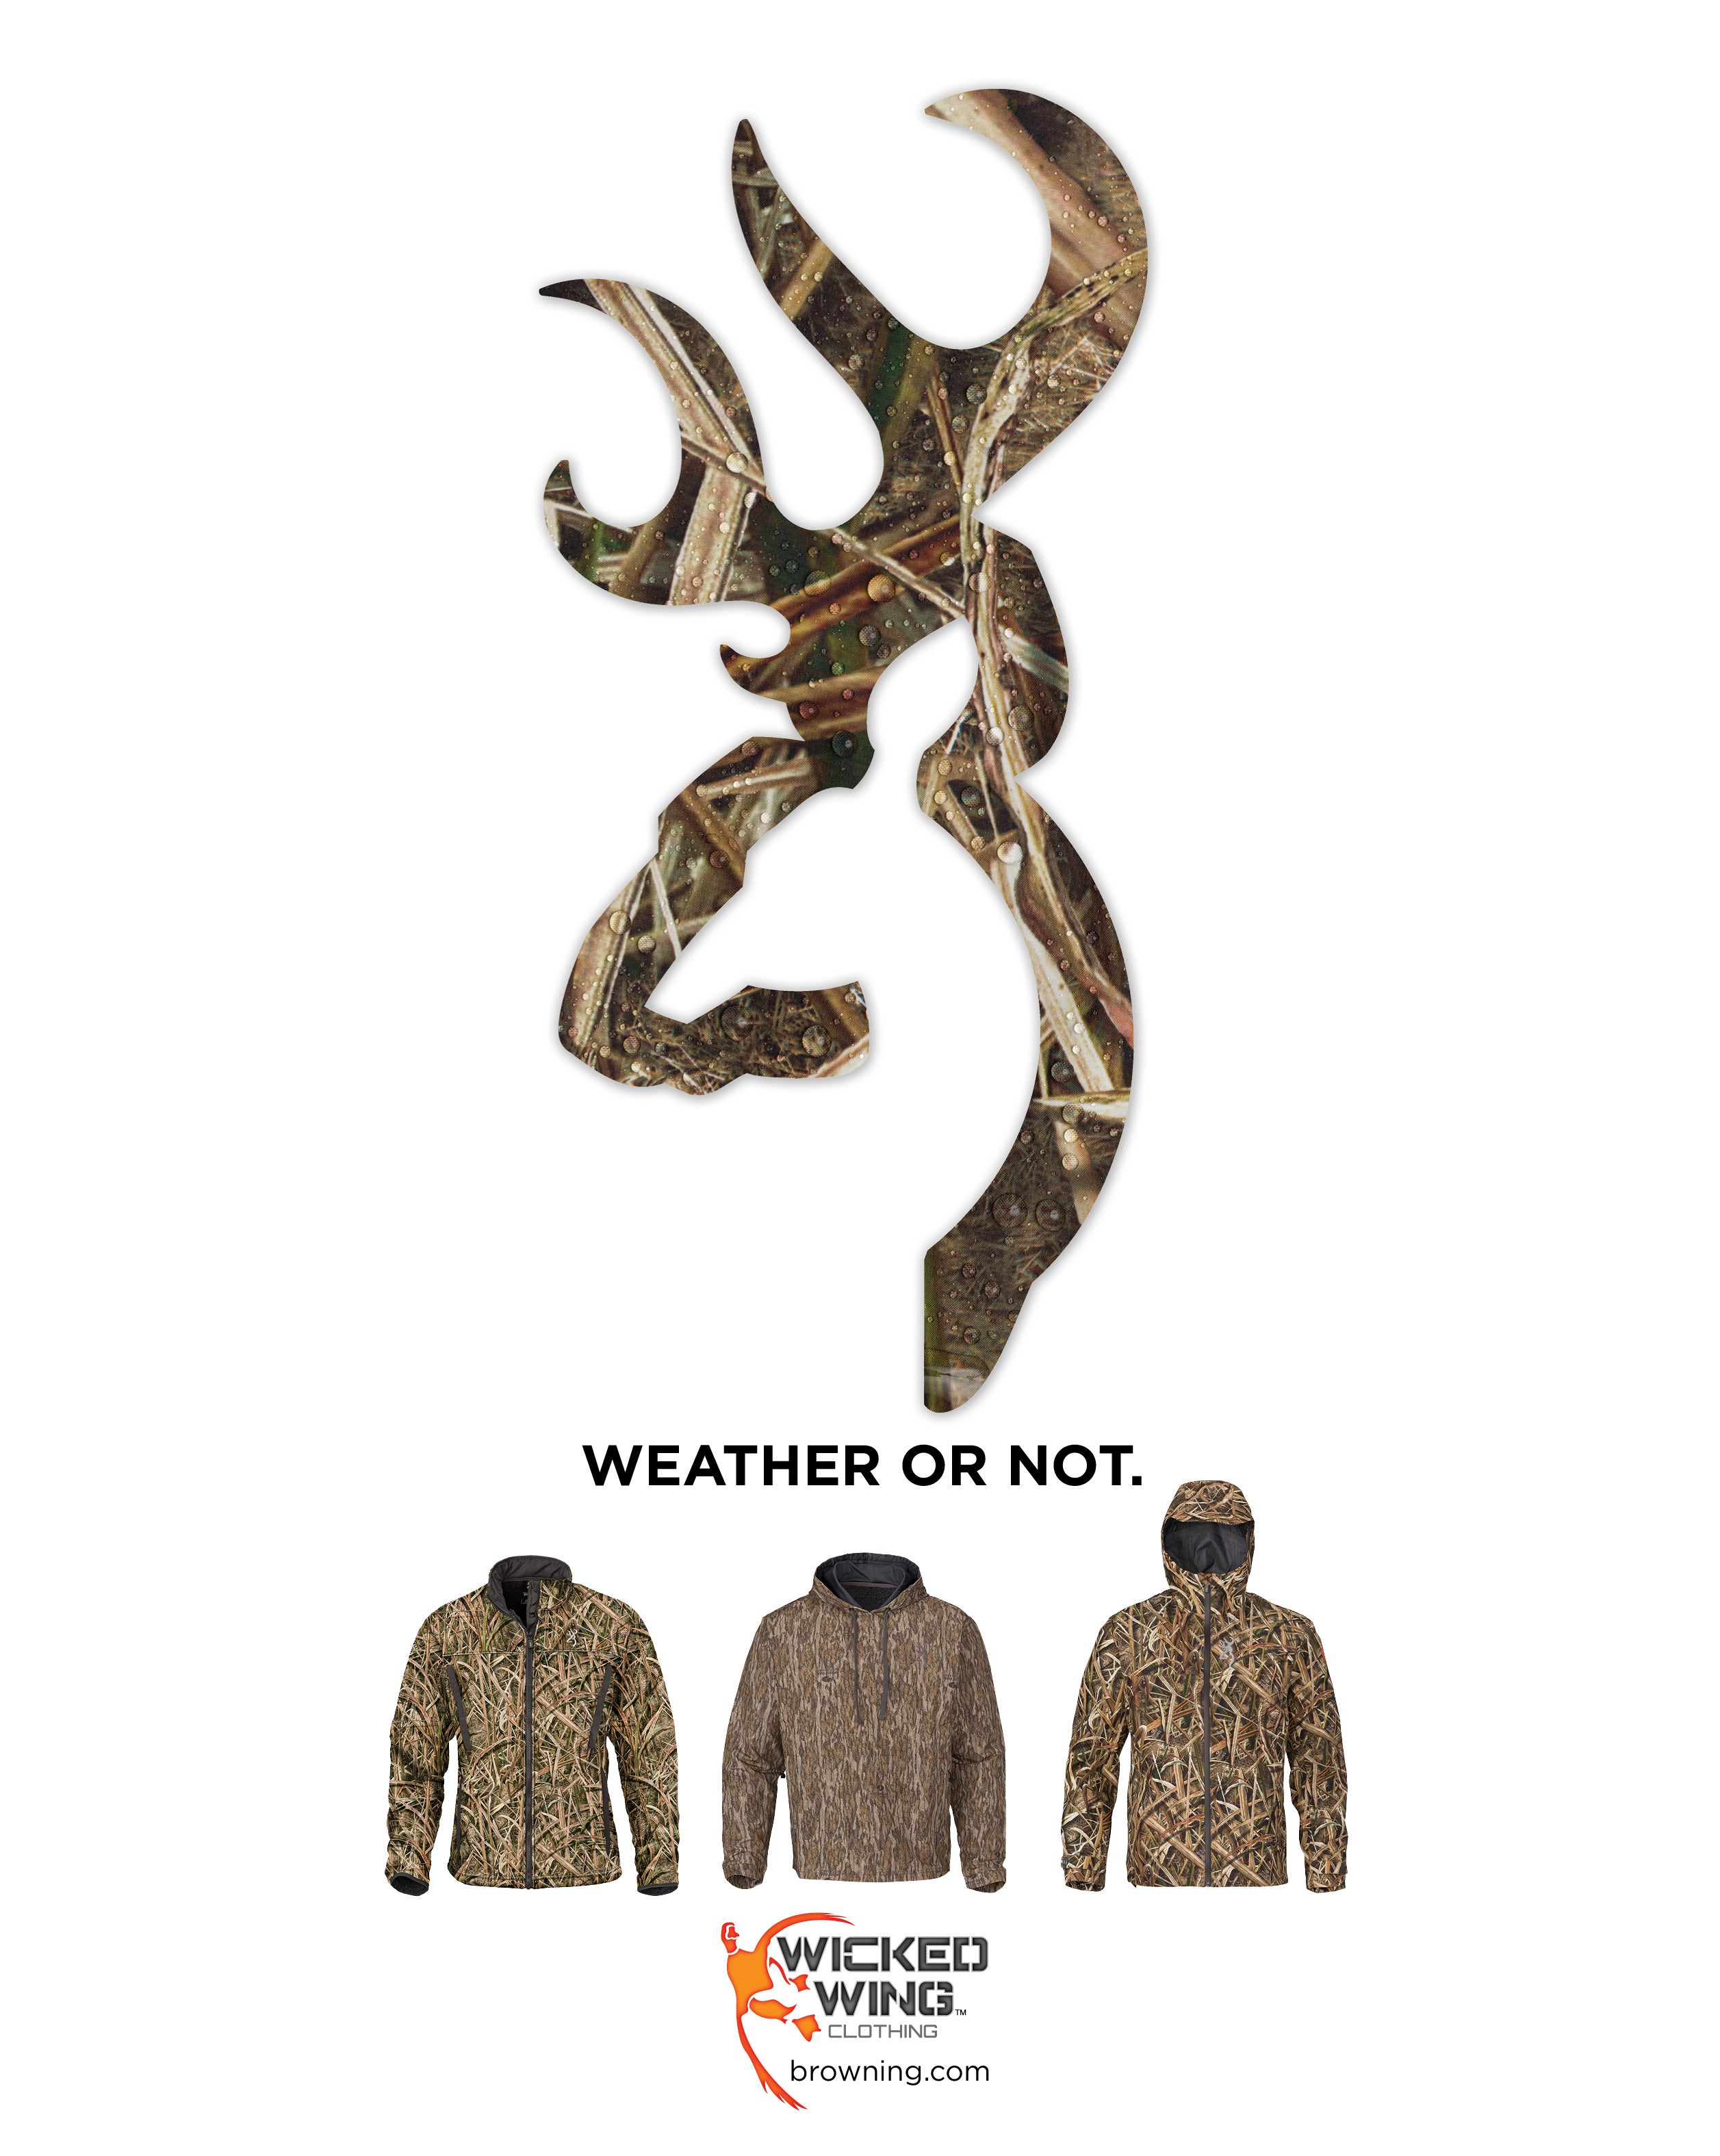 Waterfowl camo Buckmark logo with wicked wing clothing